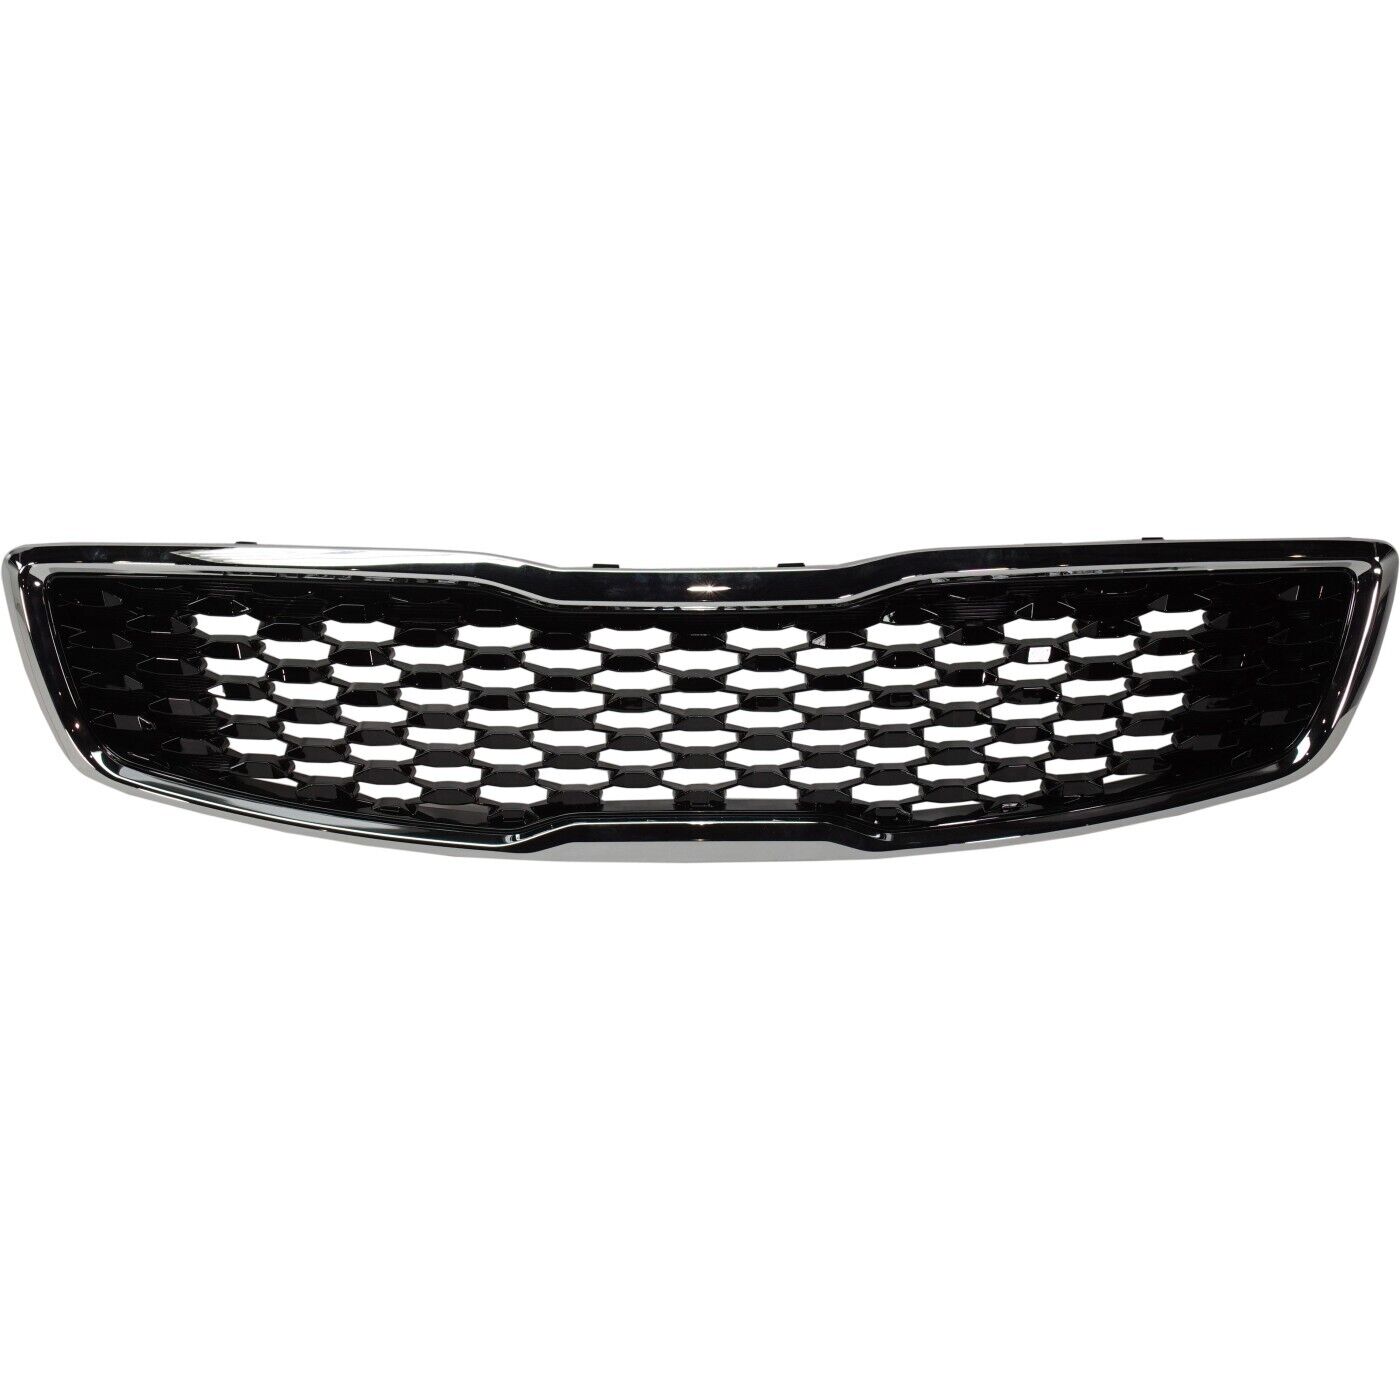 Grille Grill 86350B0010 for Kia Forte 2017-2018